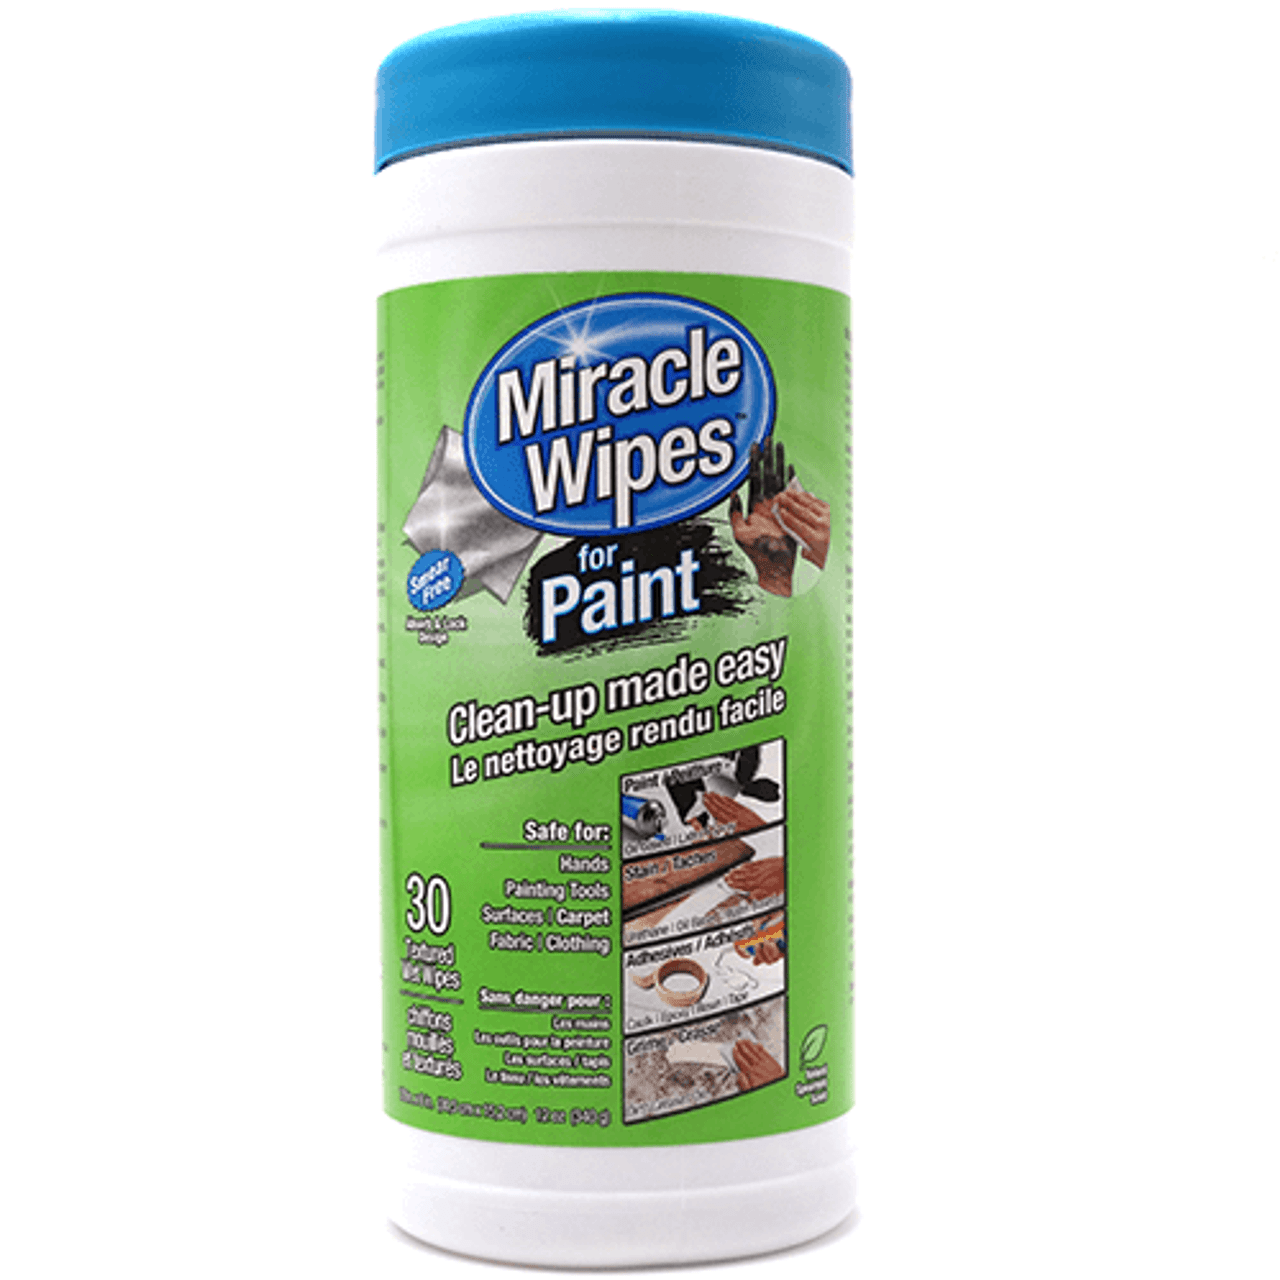 Miracle Wipes for Paint (30pk)